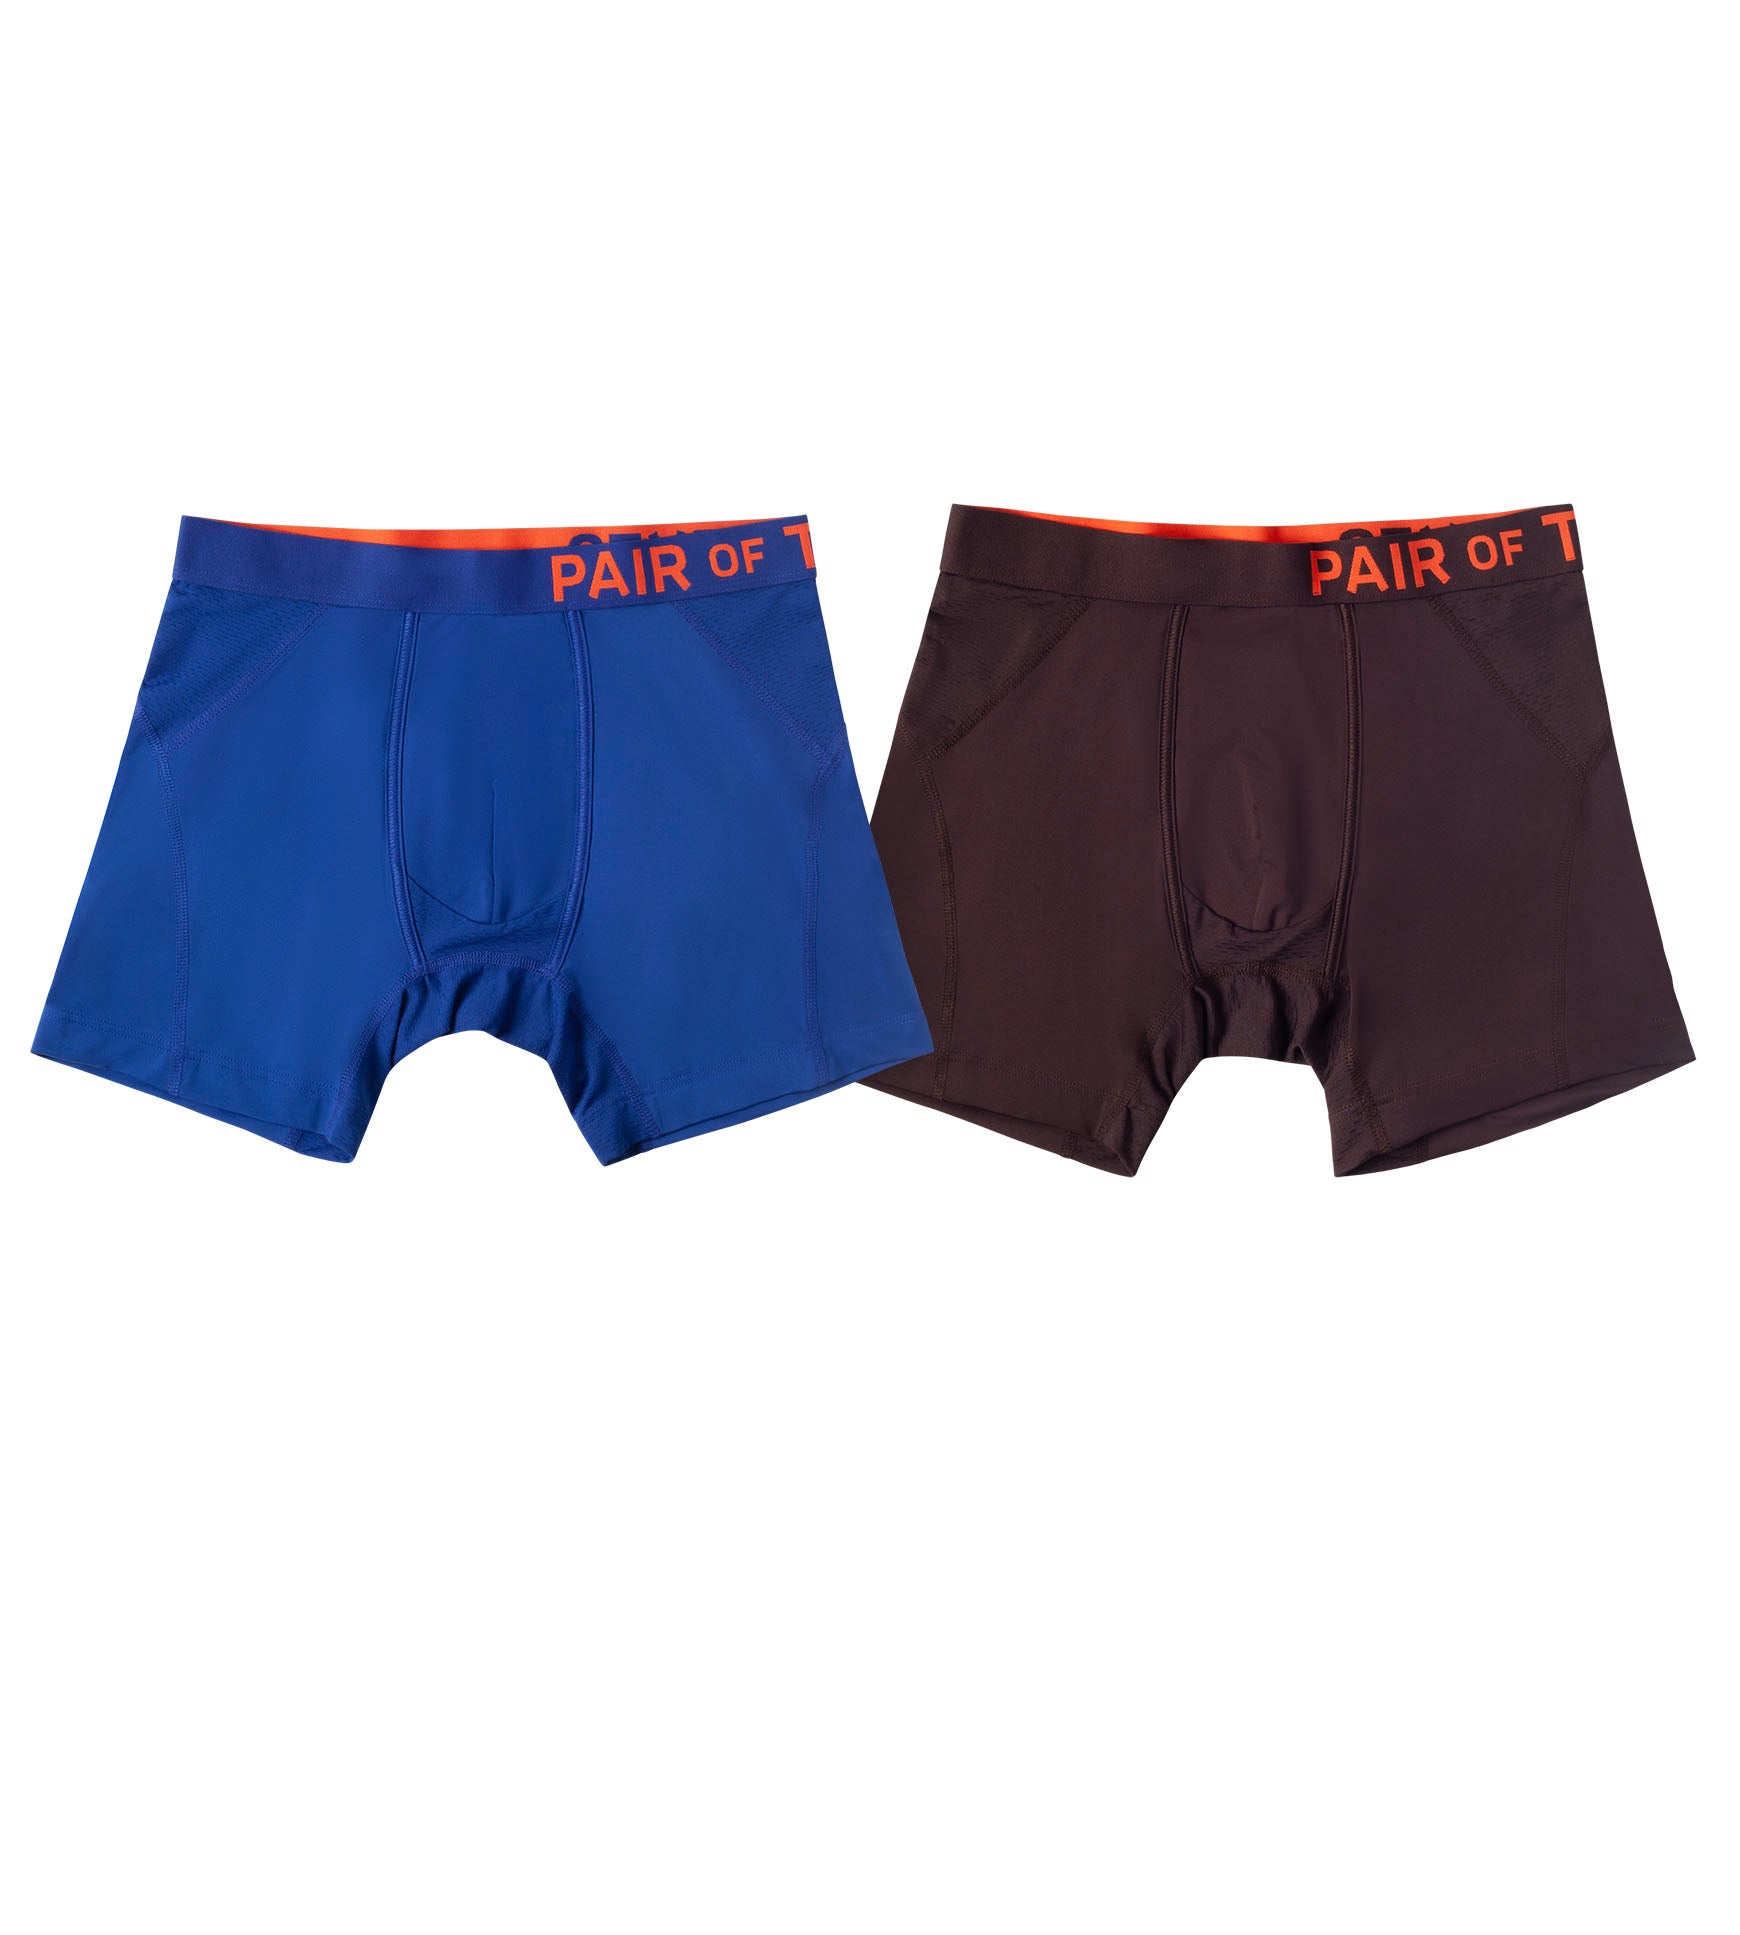 Pair of Thieves Hustle Boxer Briefs, 2-Pack, Faces 